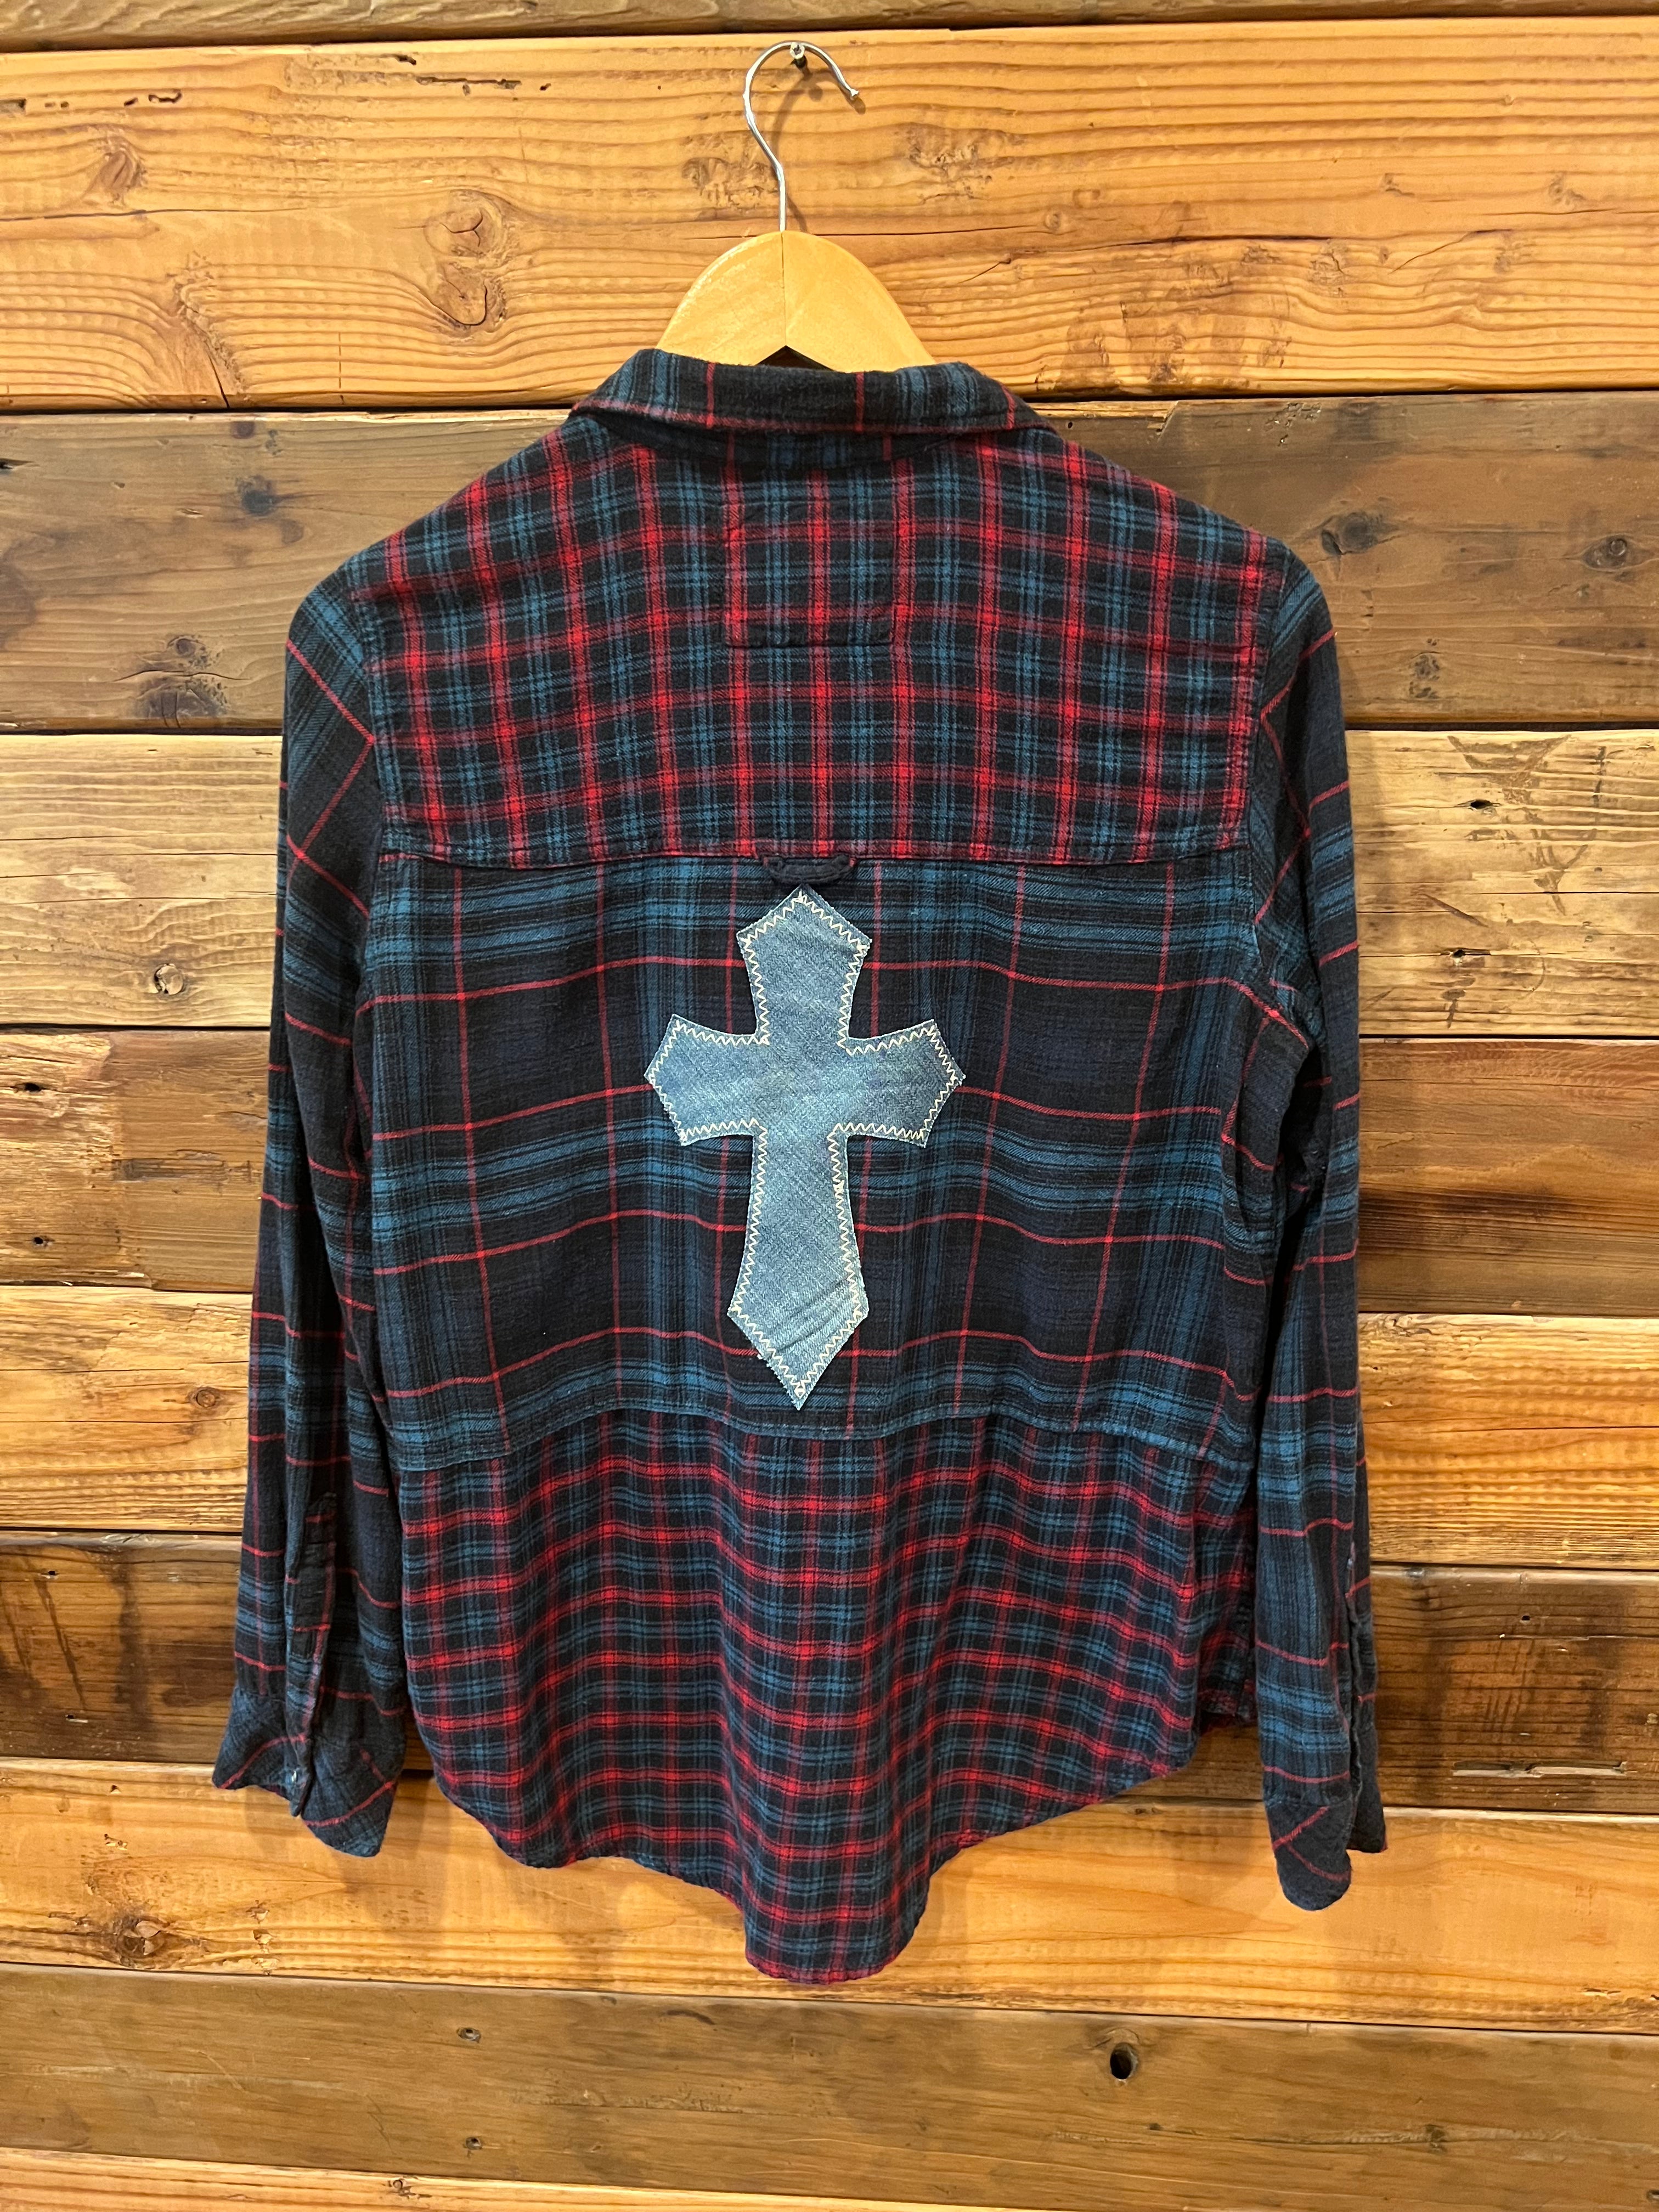 Abercrombie & Fitch soft flannel, one of a kind custom MadAndie cross